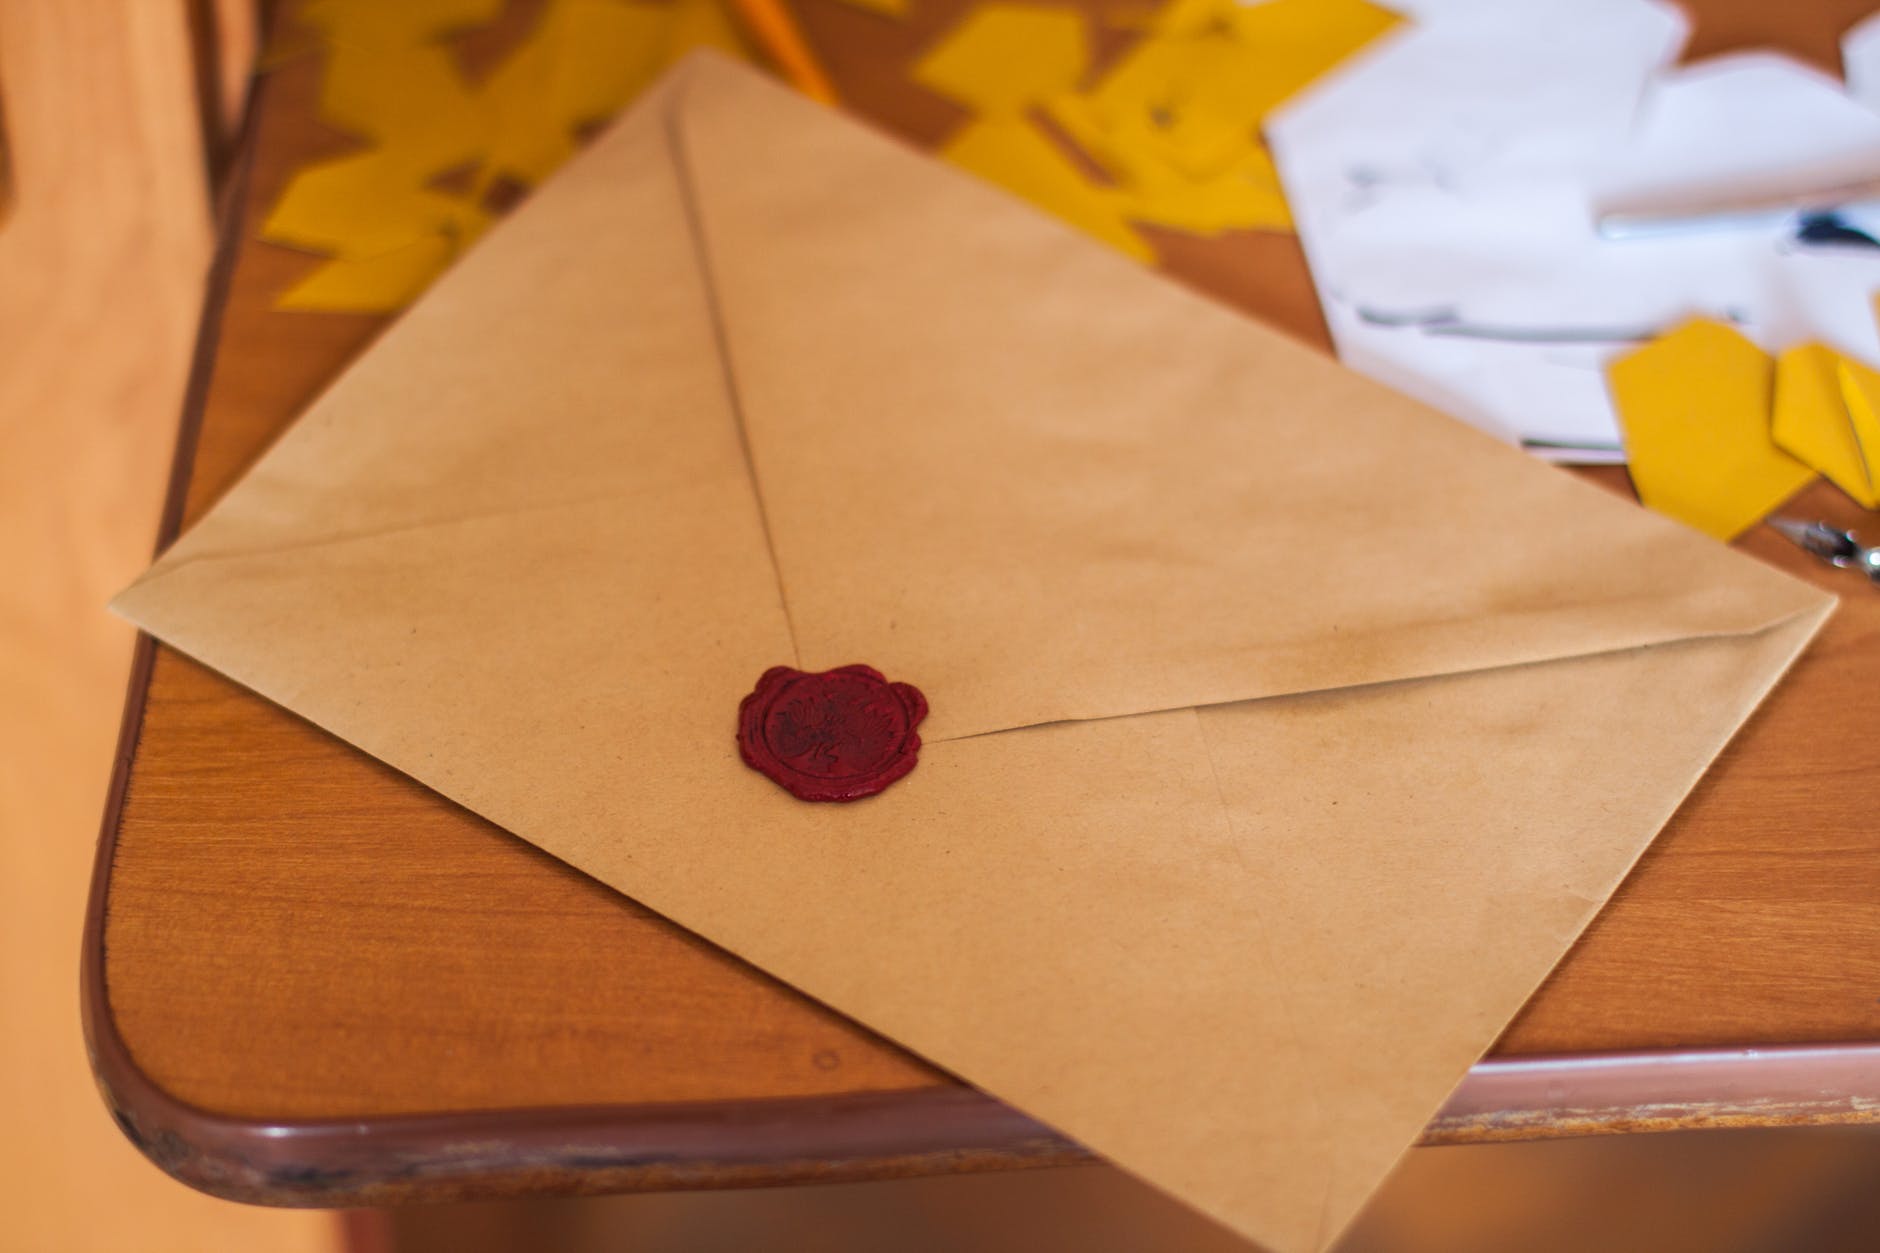 She didn't expect to see Karl's name on the envelope. | Source: Pexels